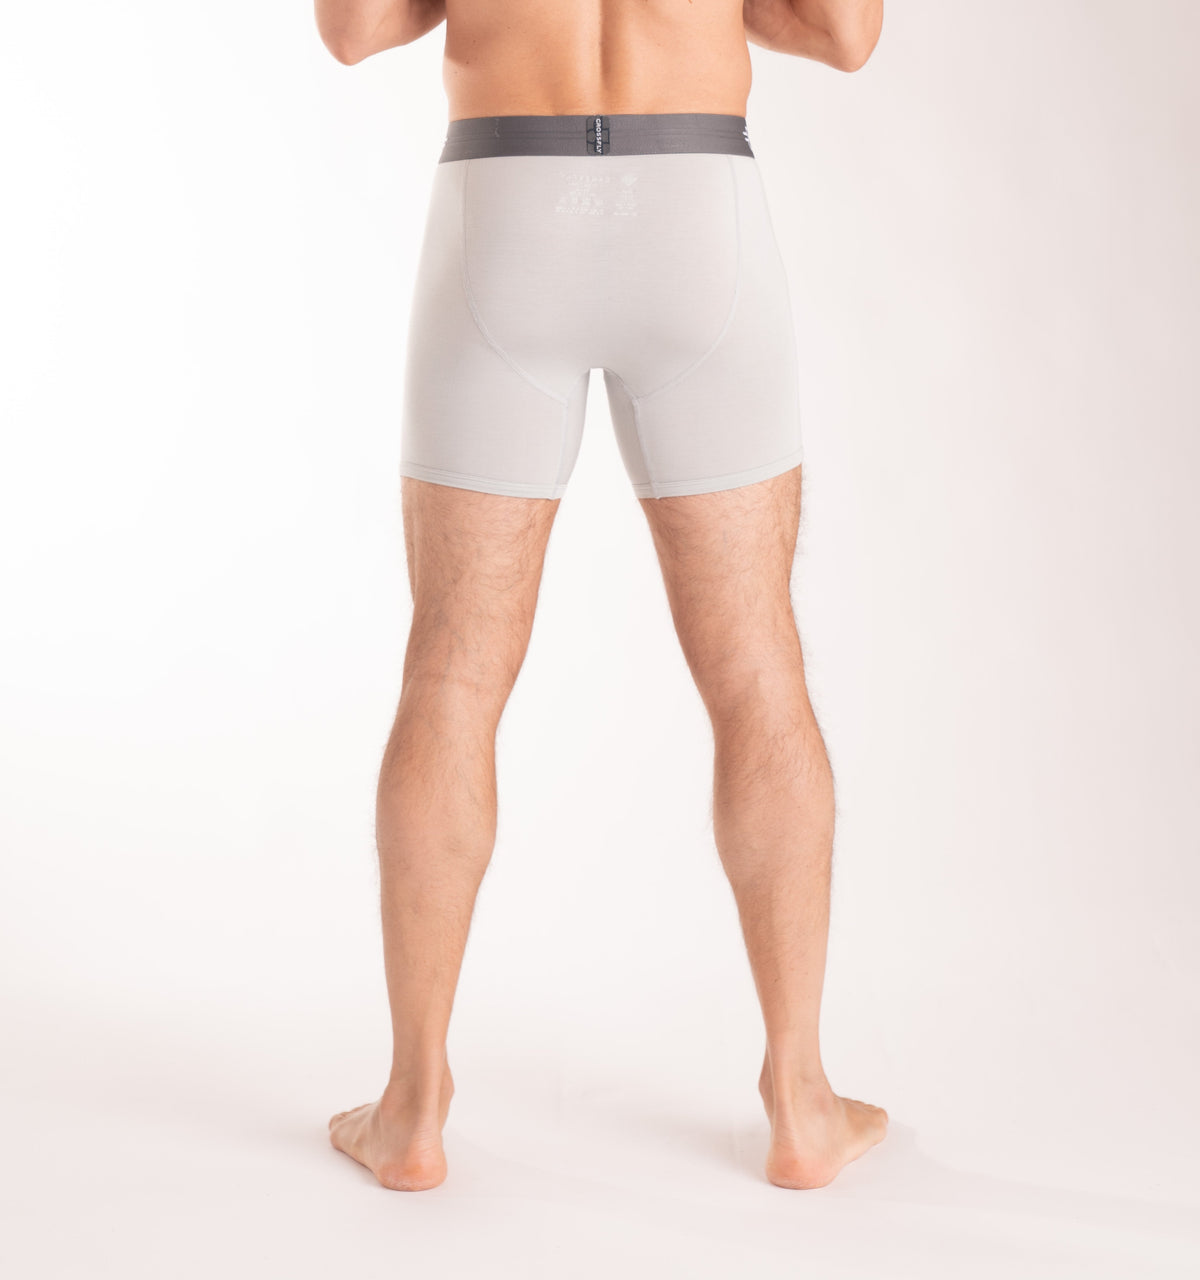 Crossfly men&#39;s IKON X 6&quot; silver / charcoal boxers from the Everyday series, featuring X-Fly and Coccoon internal pocket support.